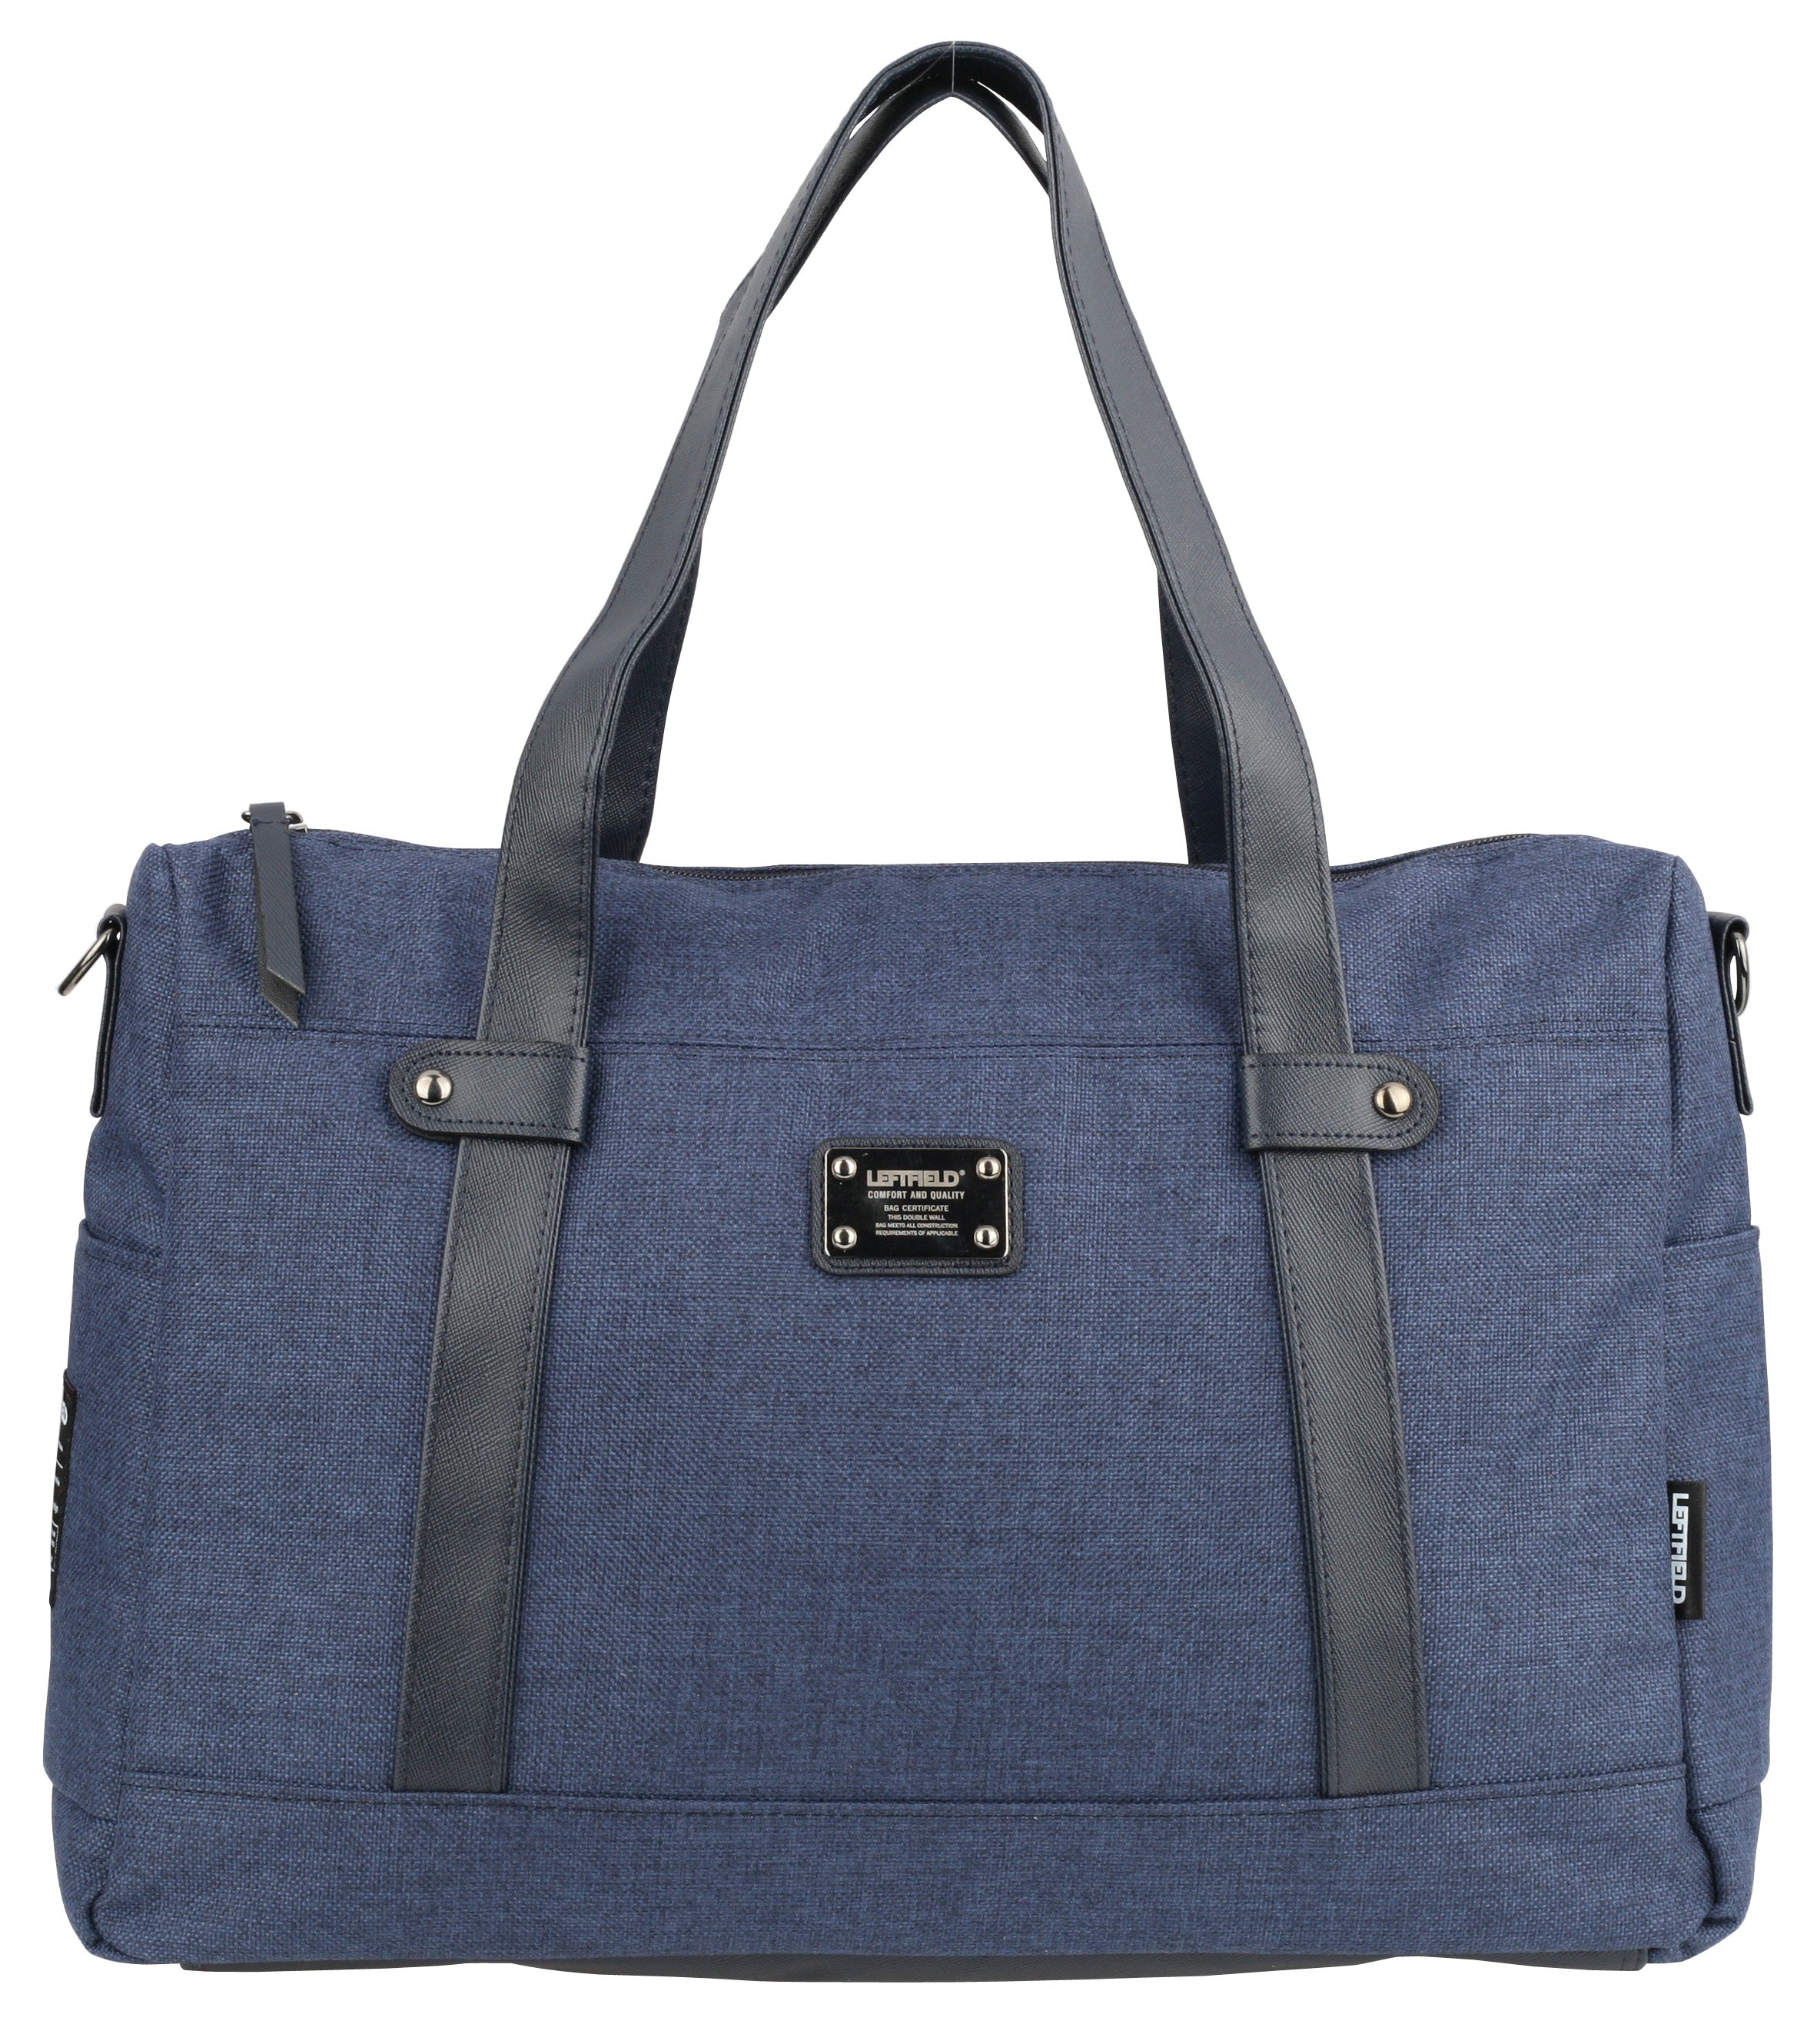 Navy Blue Canvas Totes Cross Body Bags